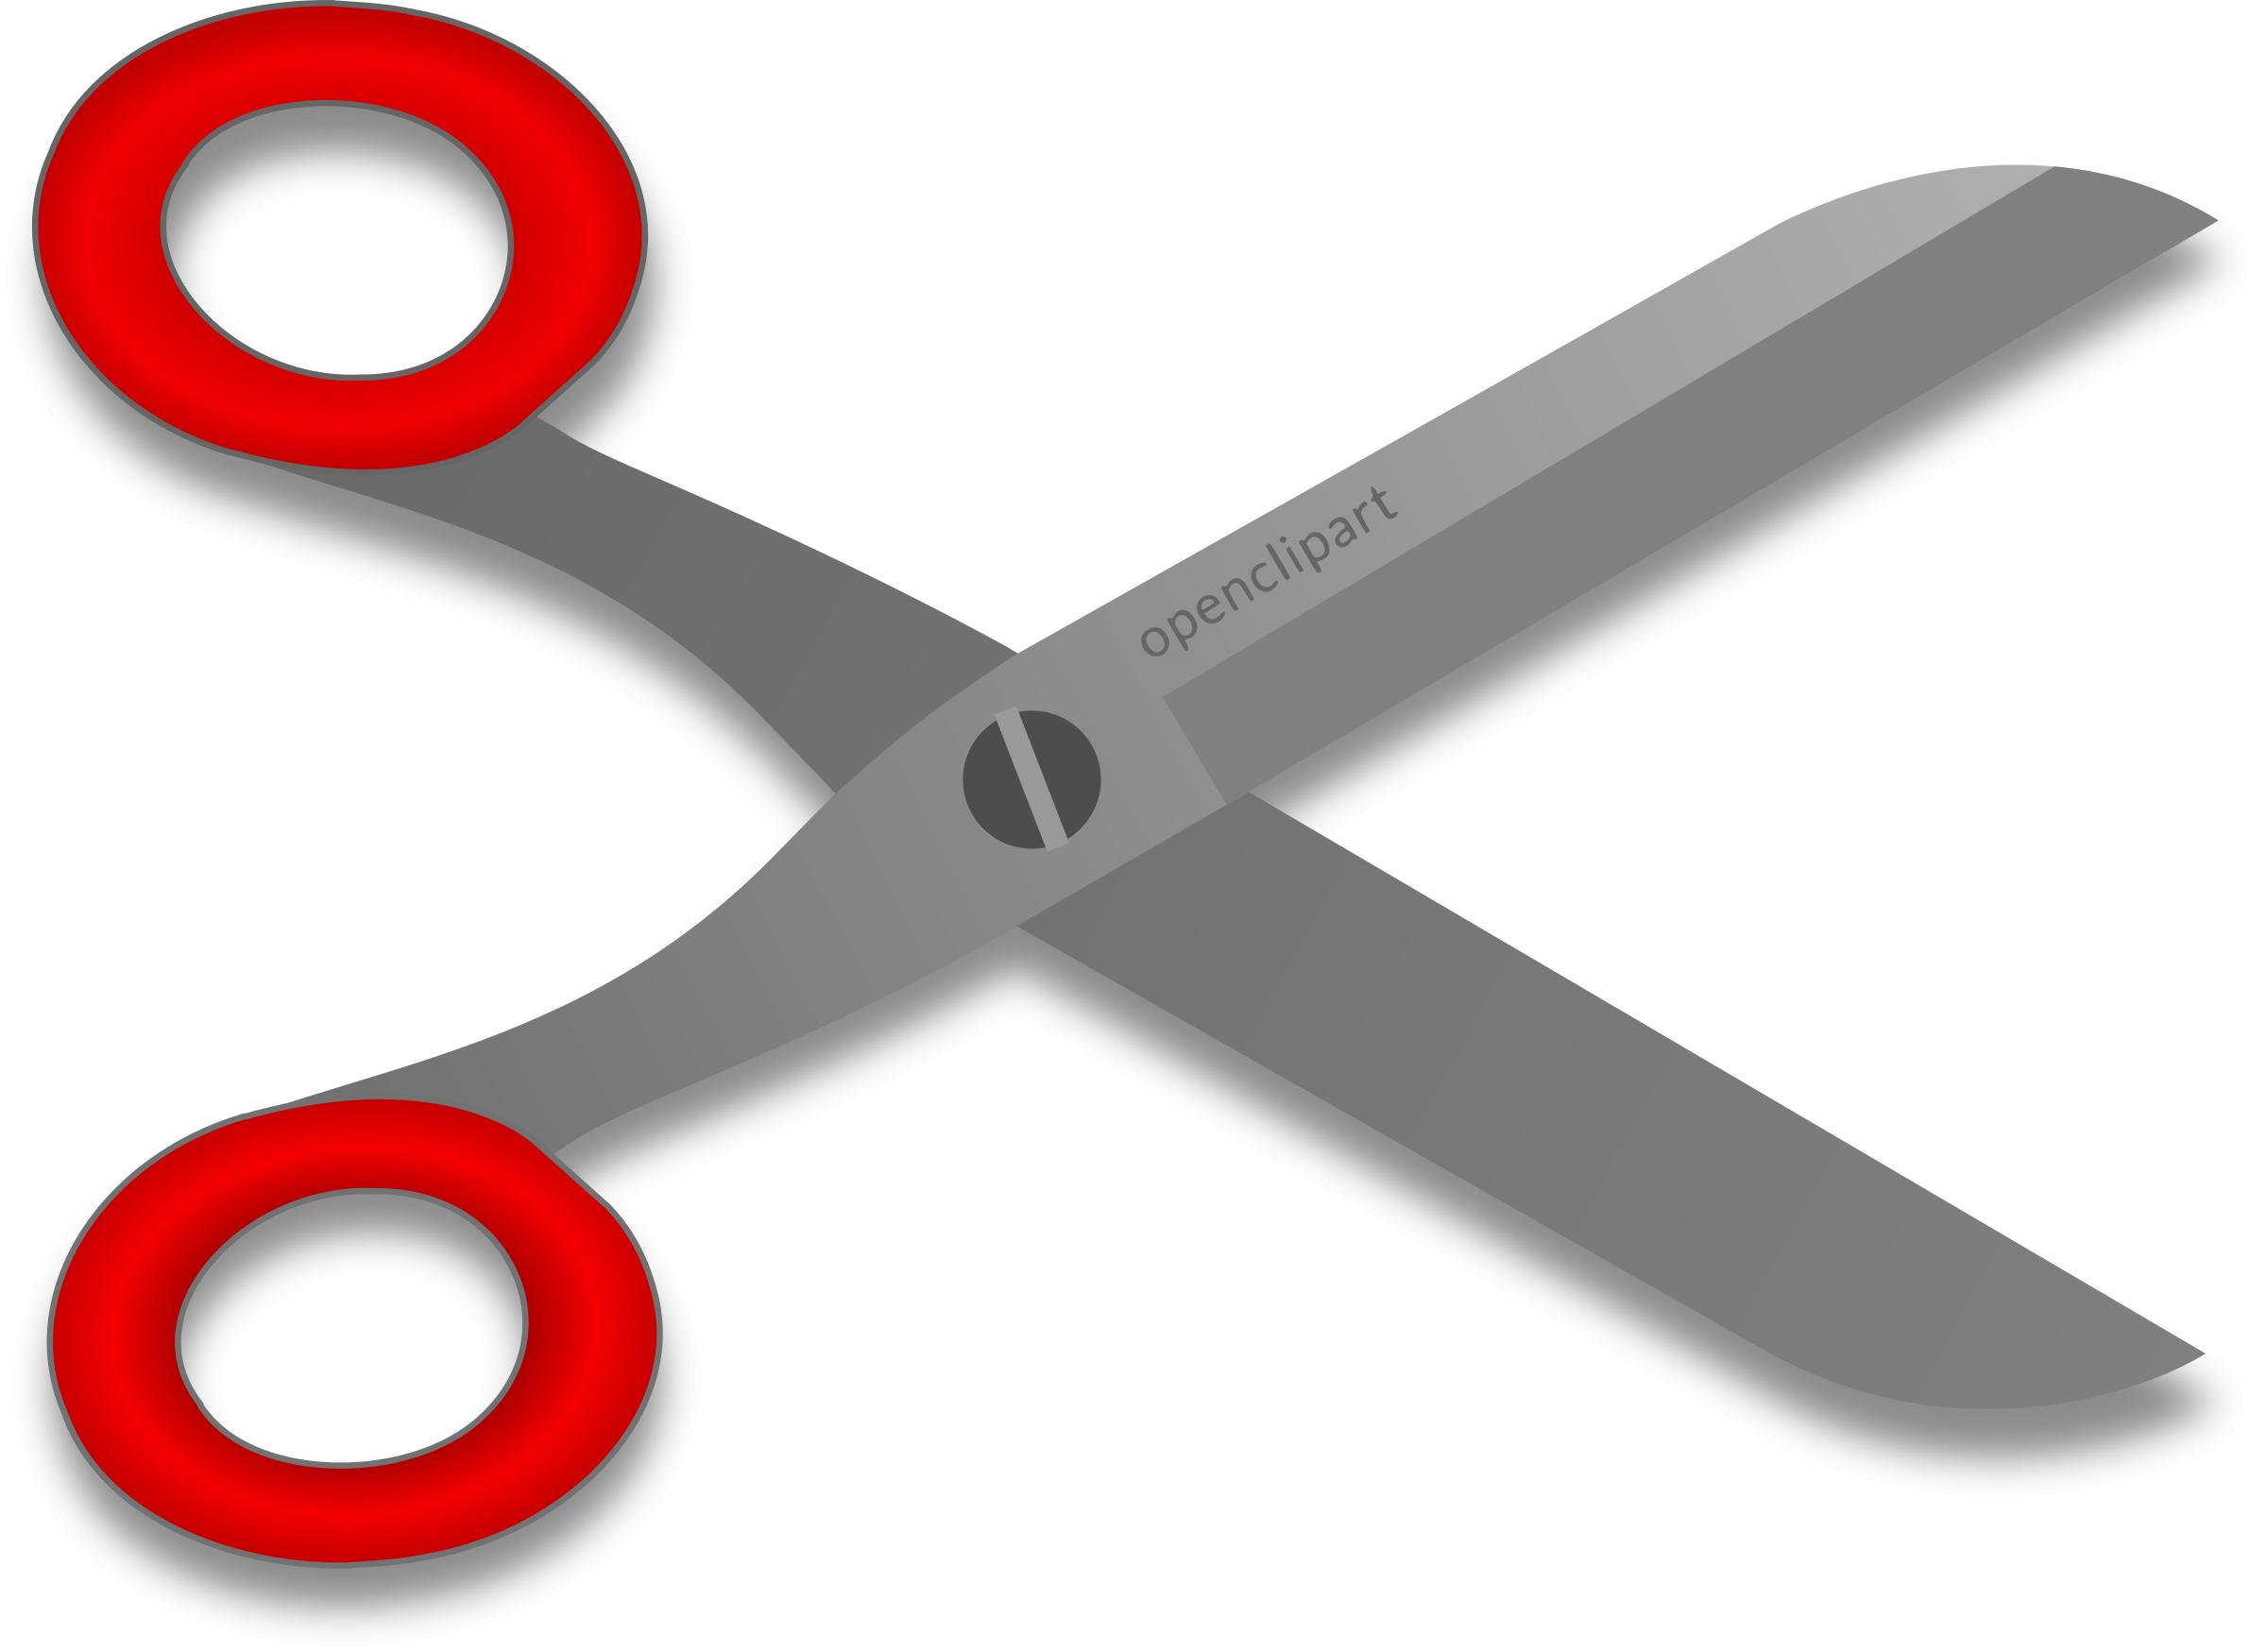 Openclipart Scissors with red ring icons